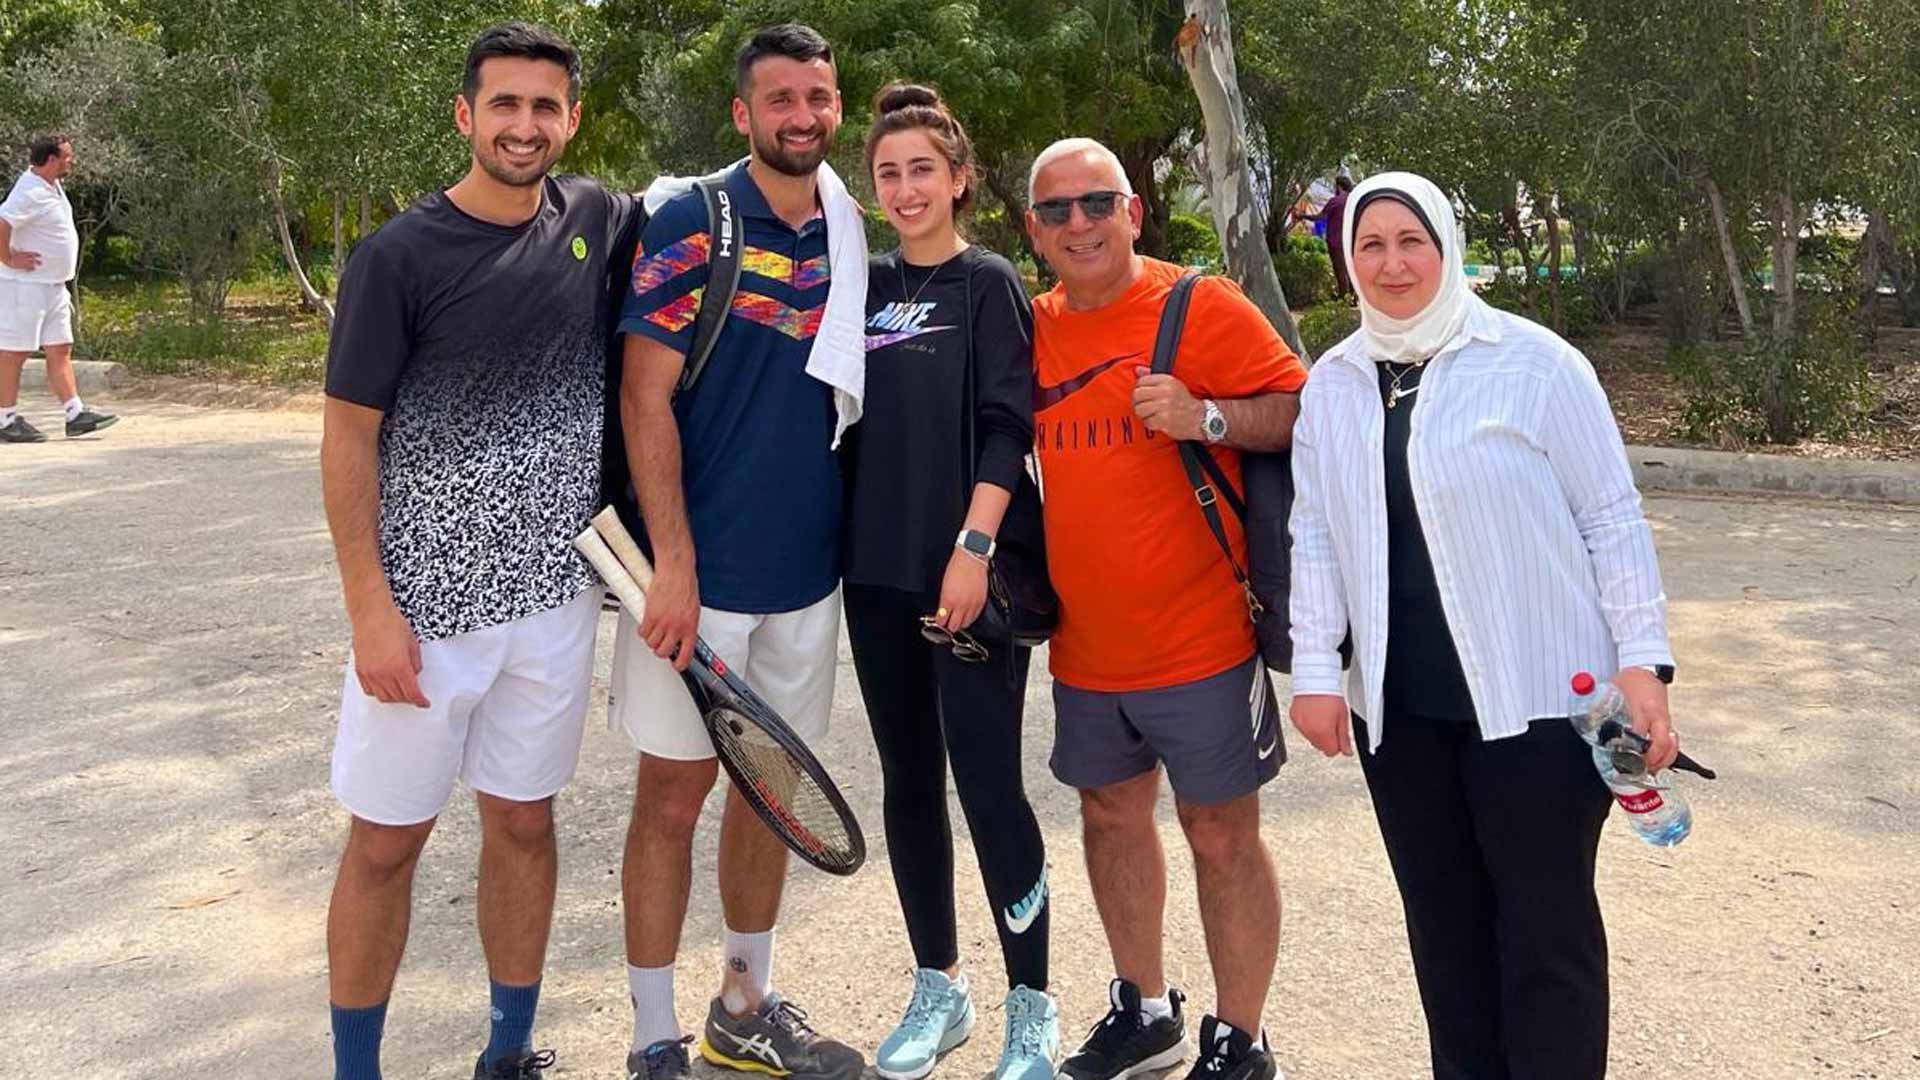 <a href='https://www.atptour.com/en/players/hazem-naw/n0bk/overview'>Hazem Naw</a> and family at the ITF M15 in Kish Island last month.